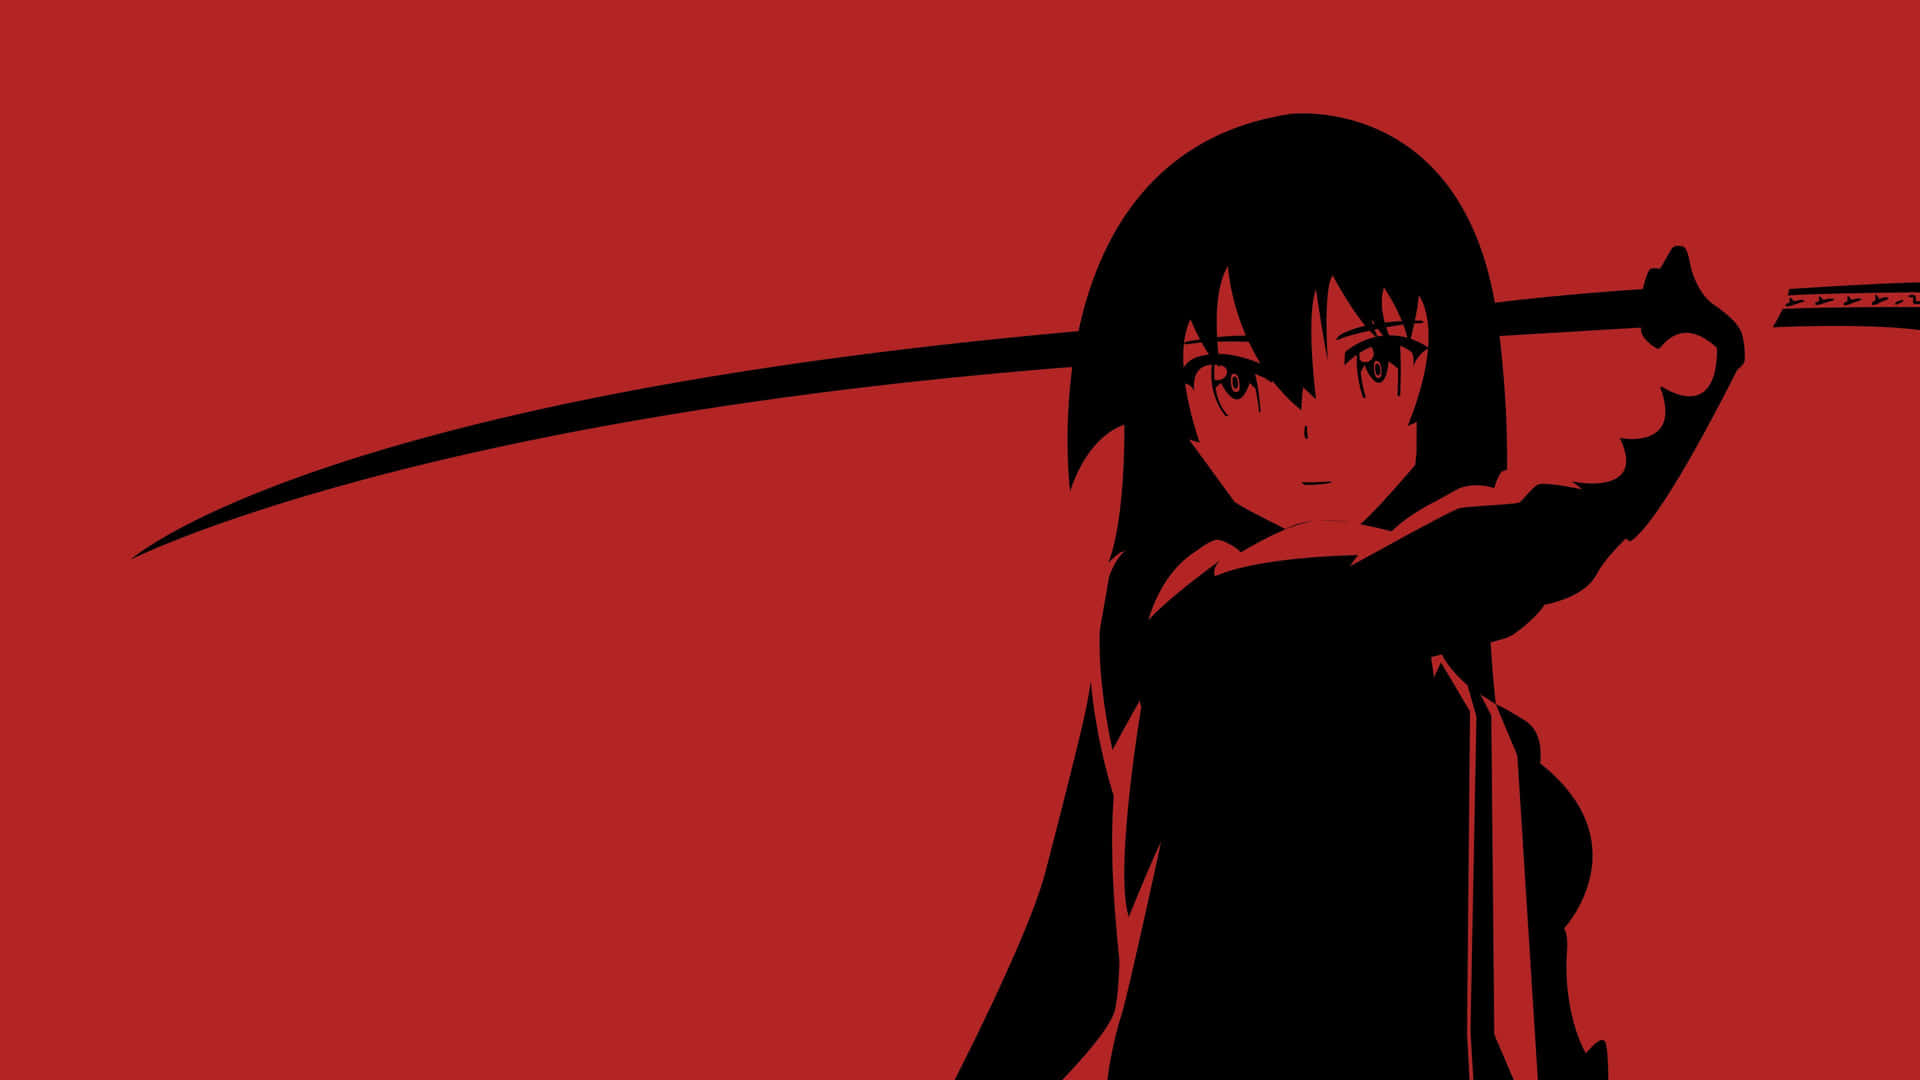 Red Aesthetic Anime Wallpapers - Wallpaper Cave